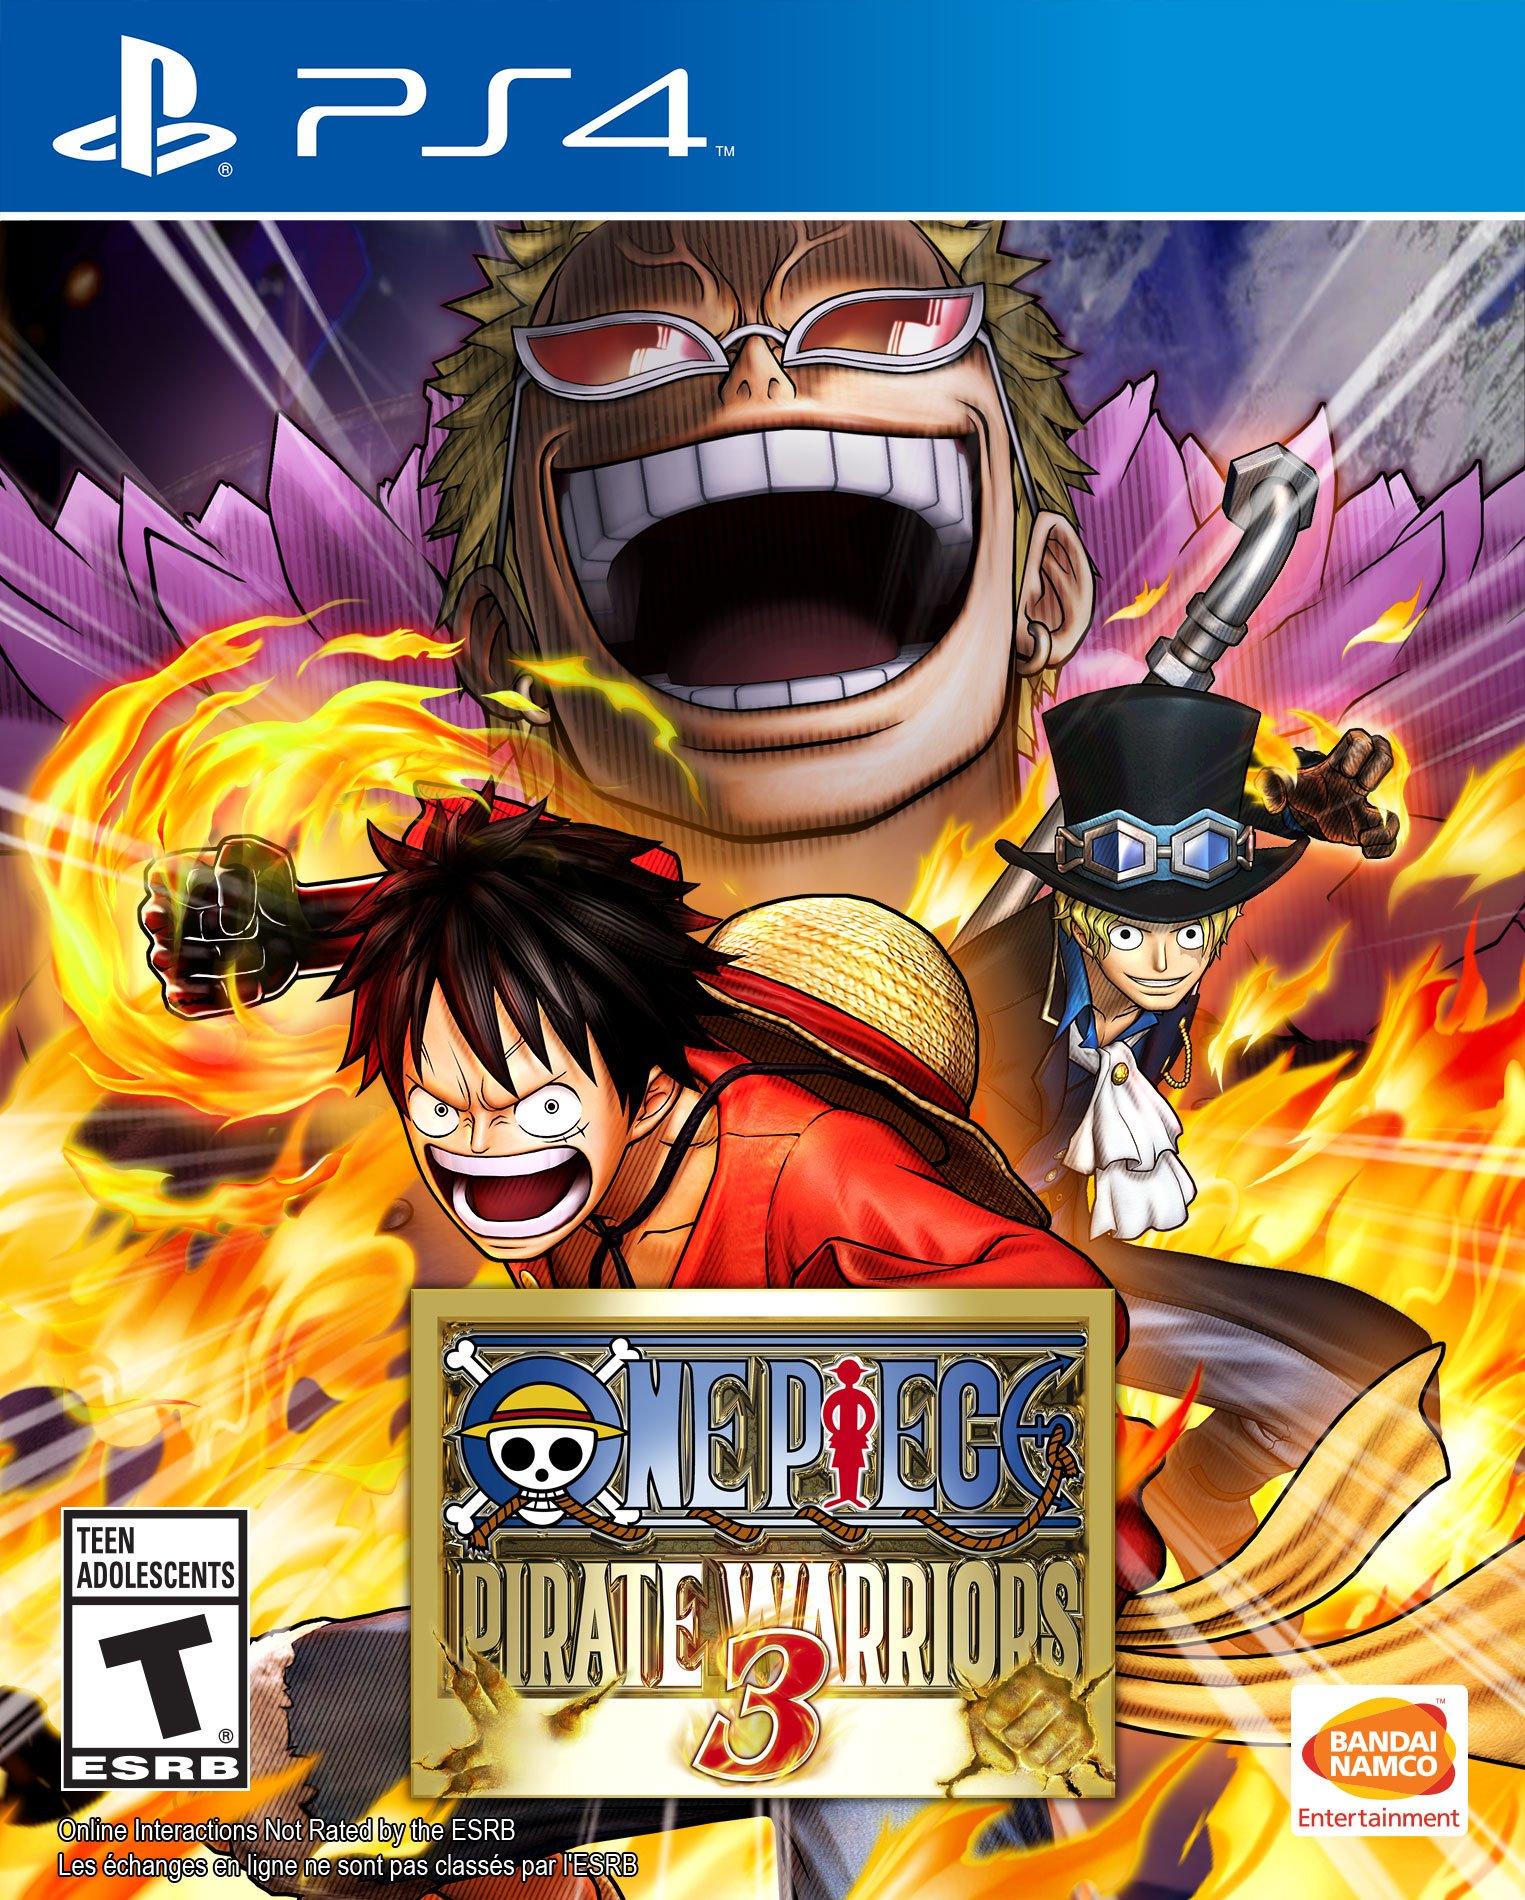 one piece ps 4